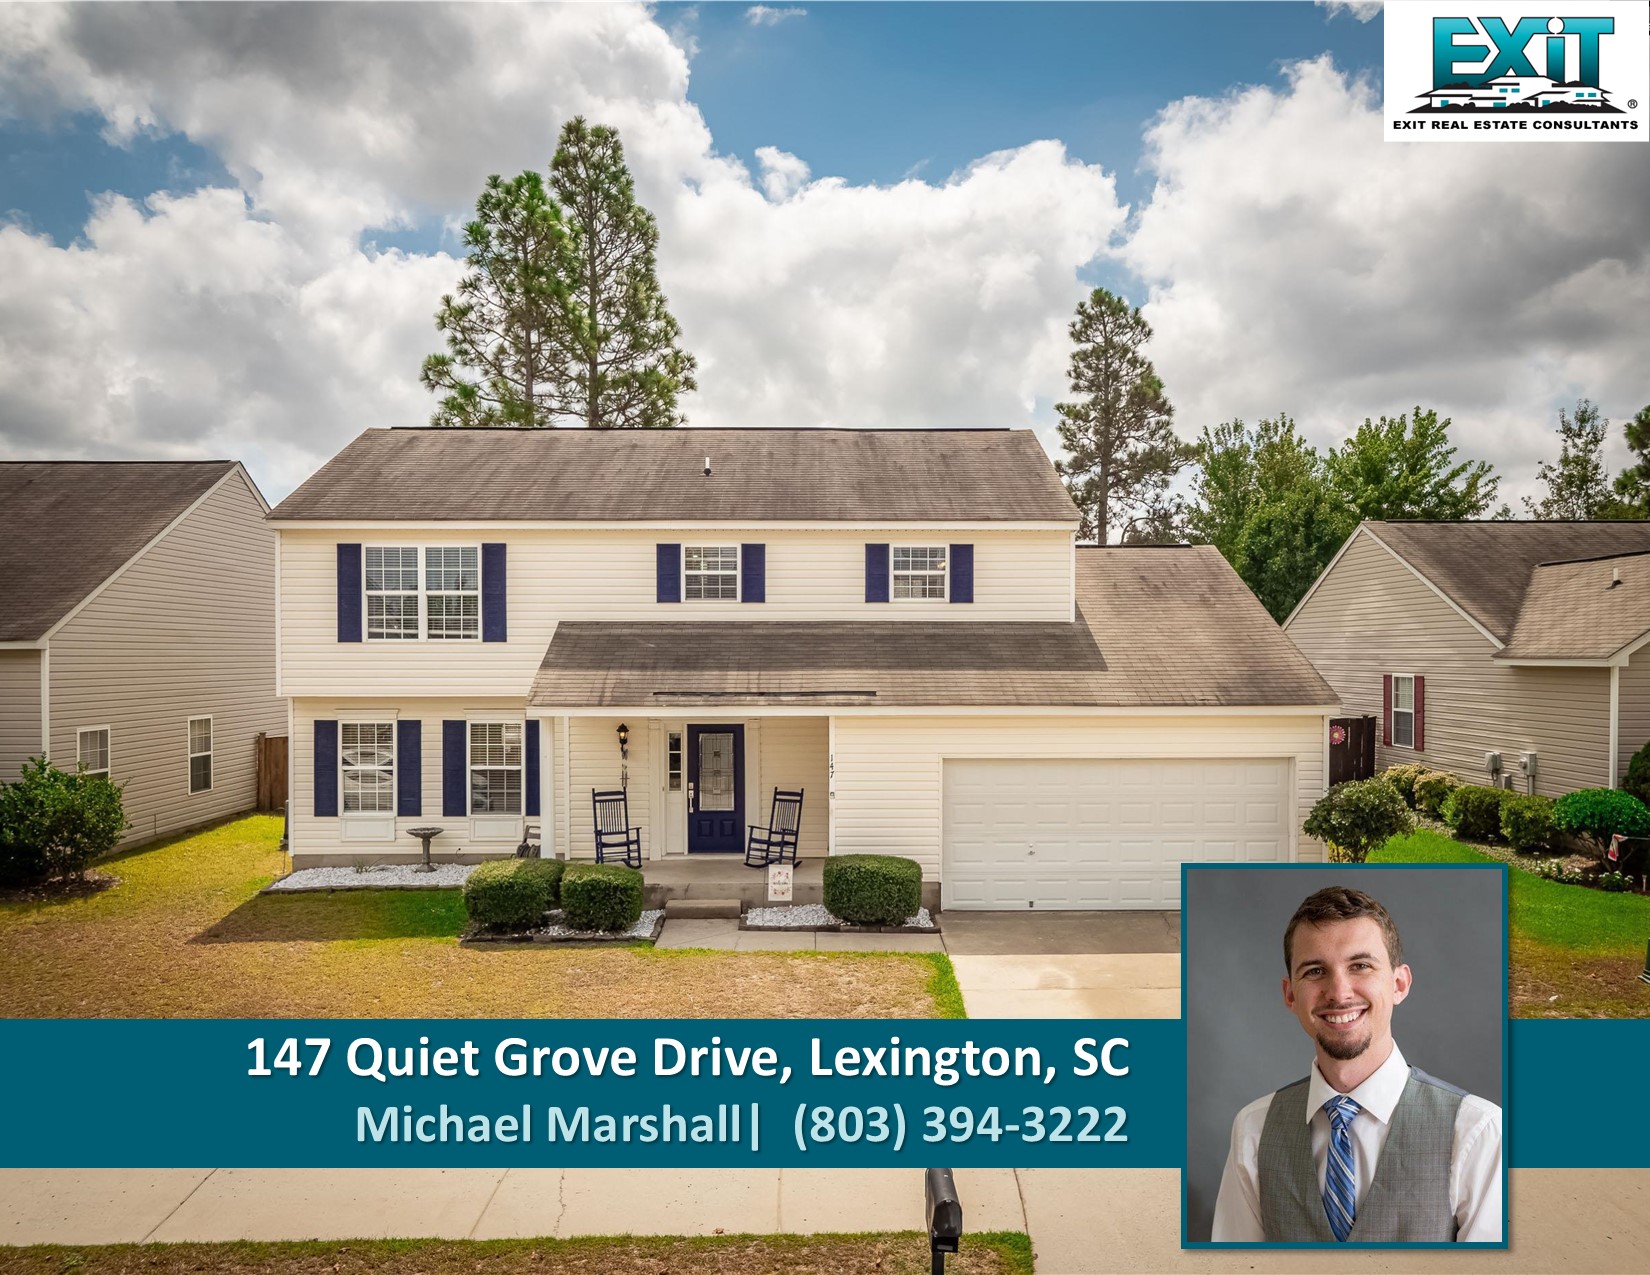 Just listed in Persimmon Grove